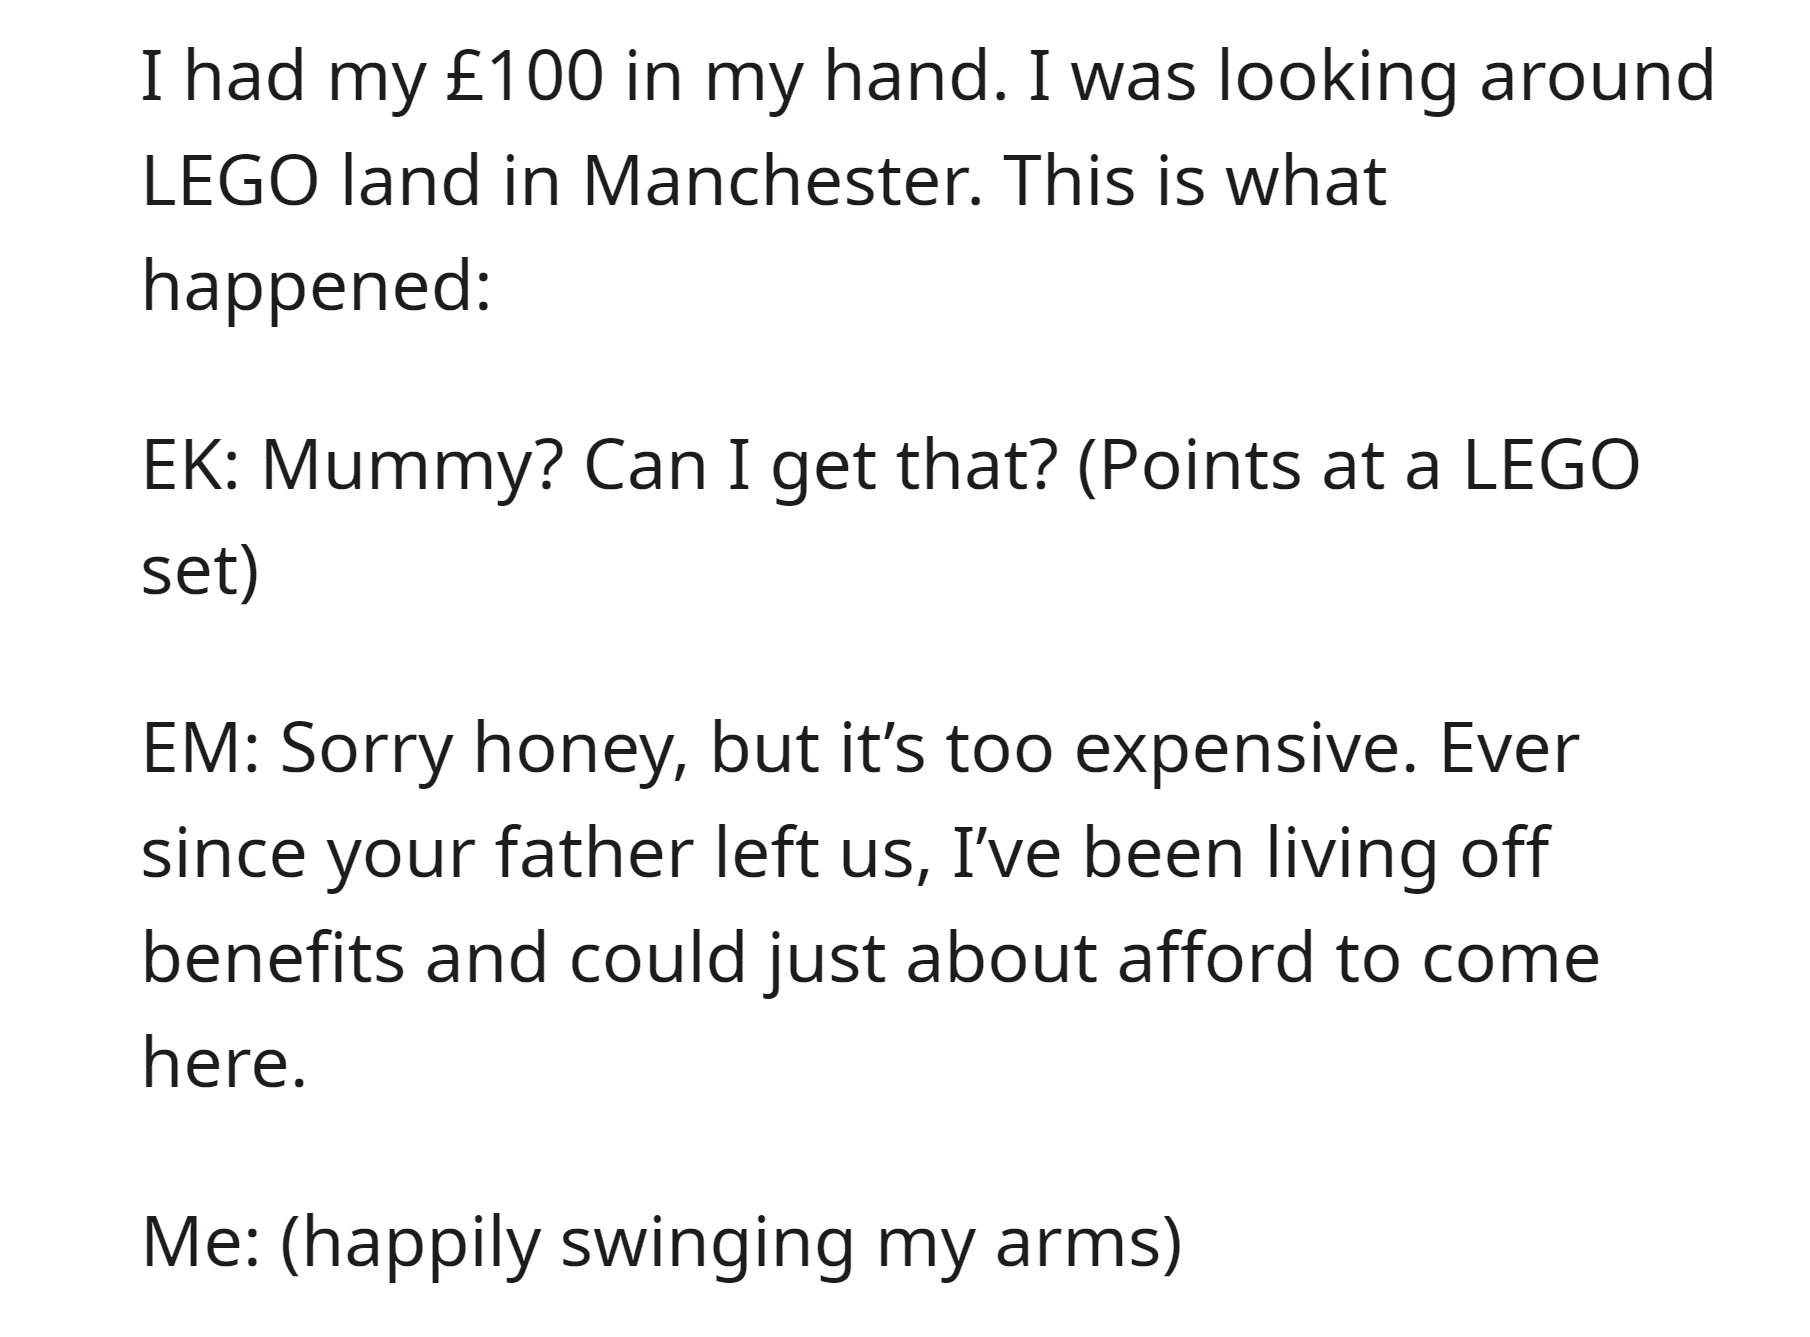 At LEGO, the OP overheard a child asking their mum for a LEGO set